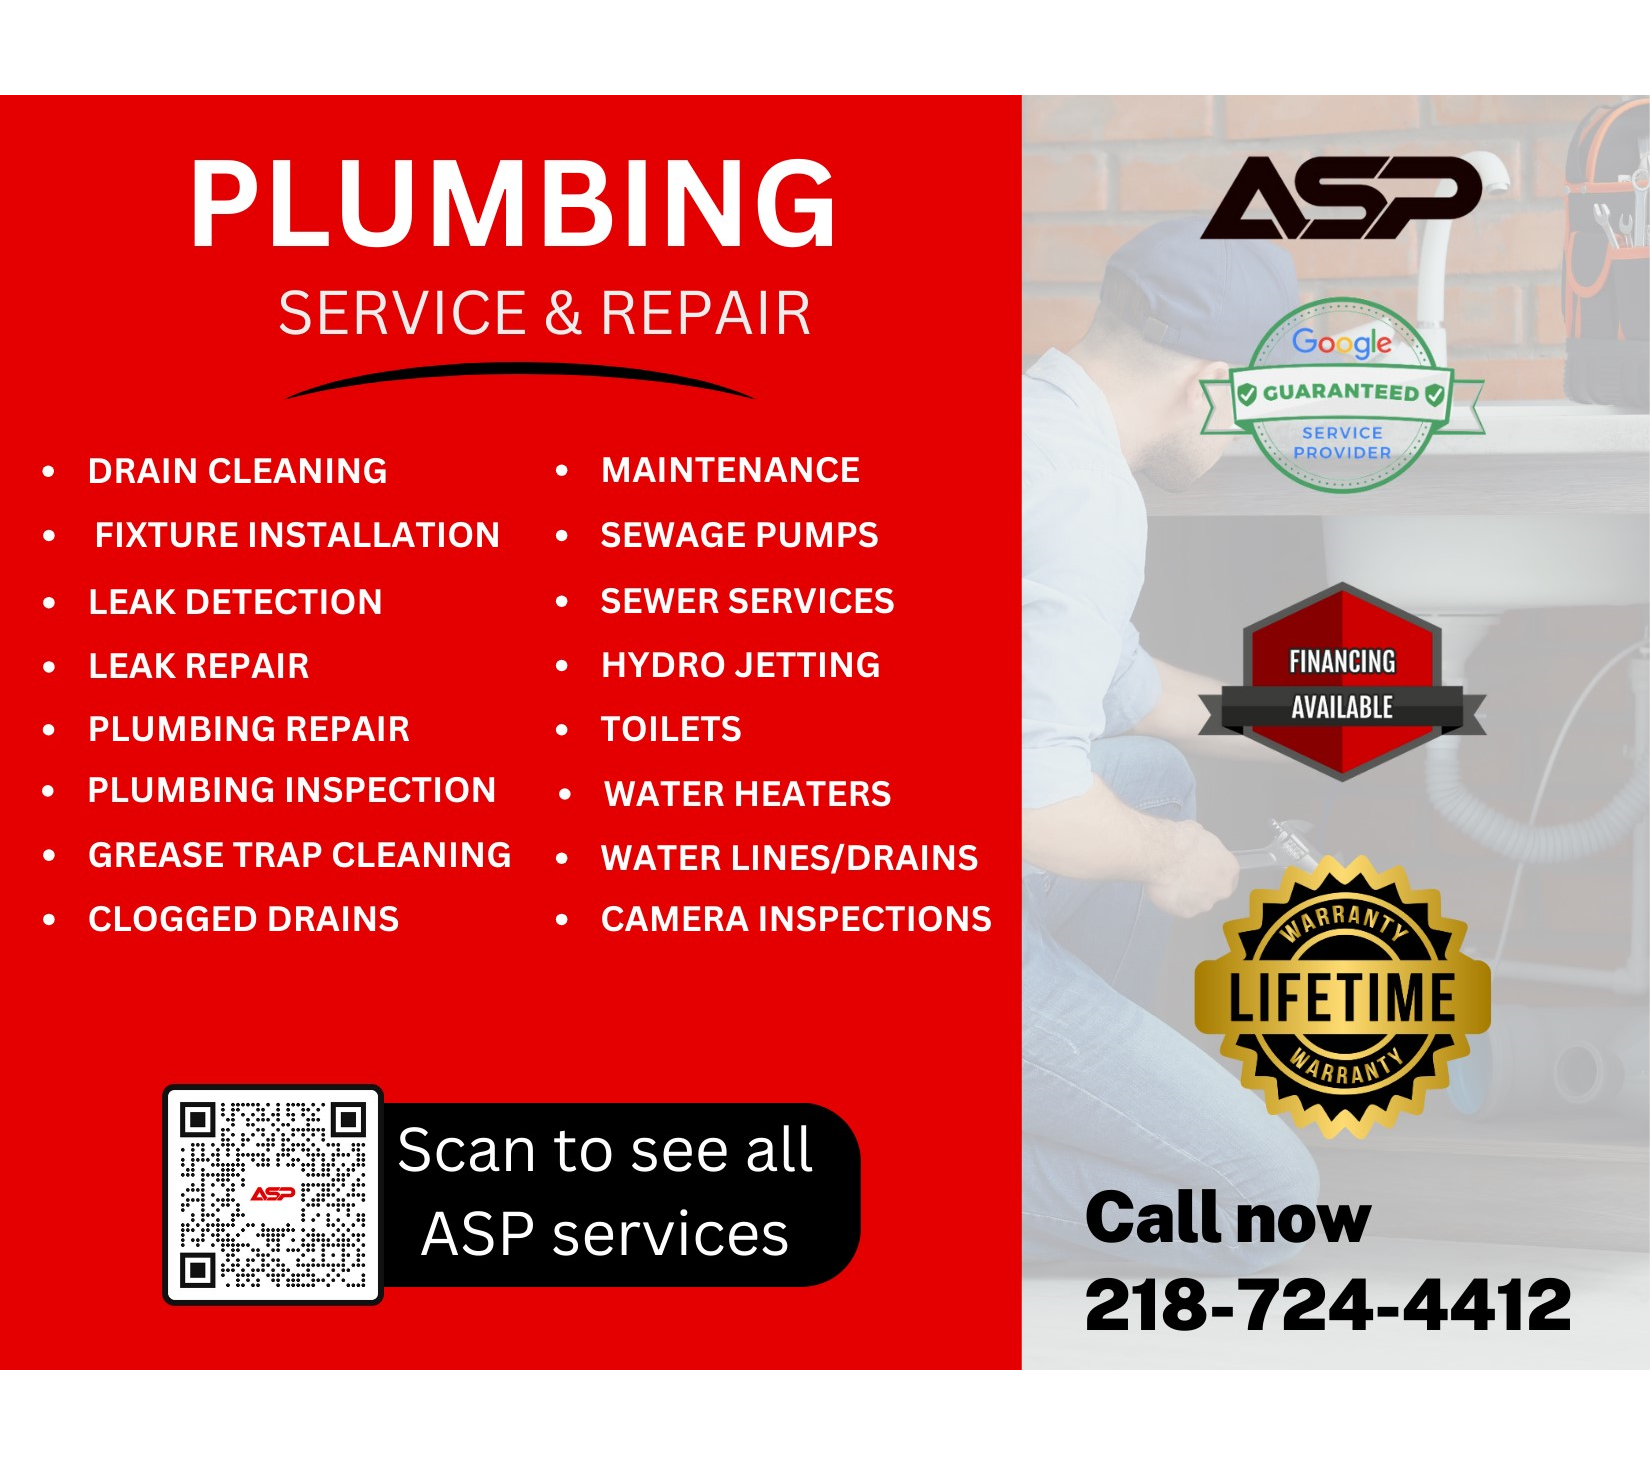 Plumbing Service and Repair Flyer featuring the Google Guarantee Badge.